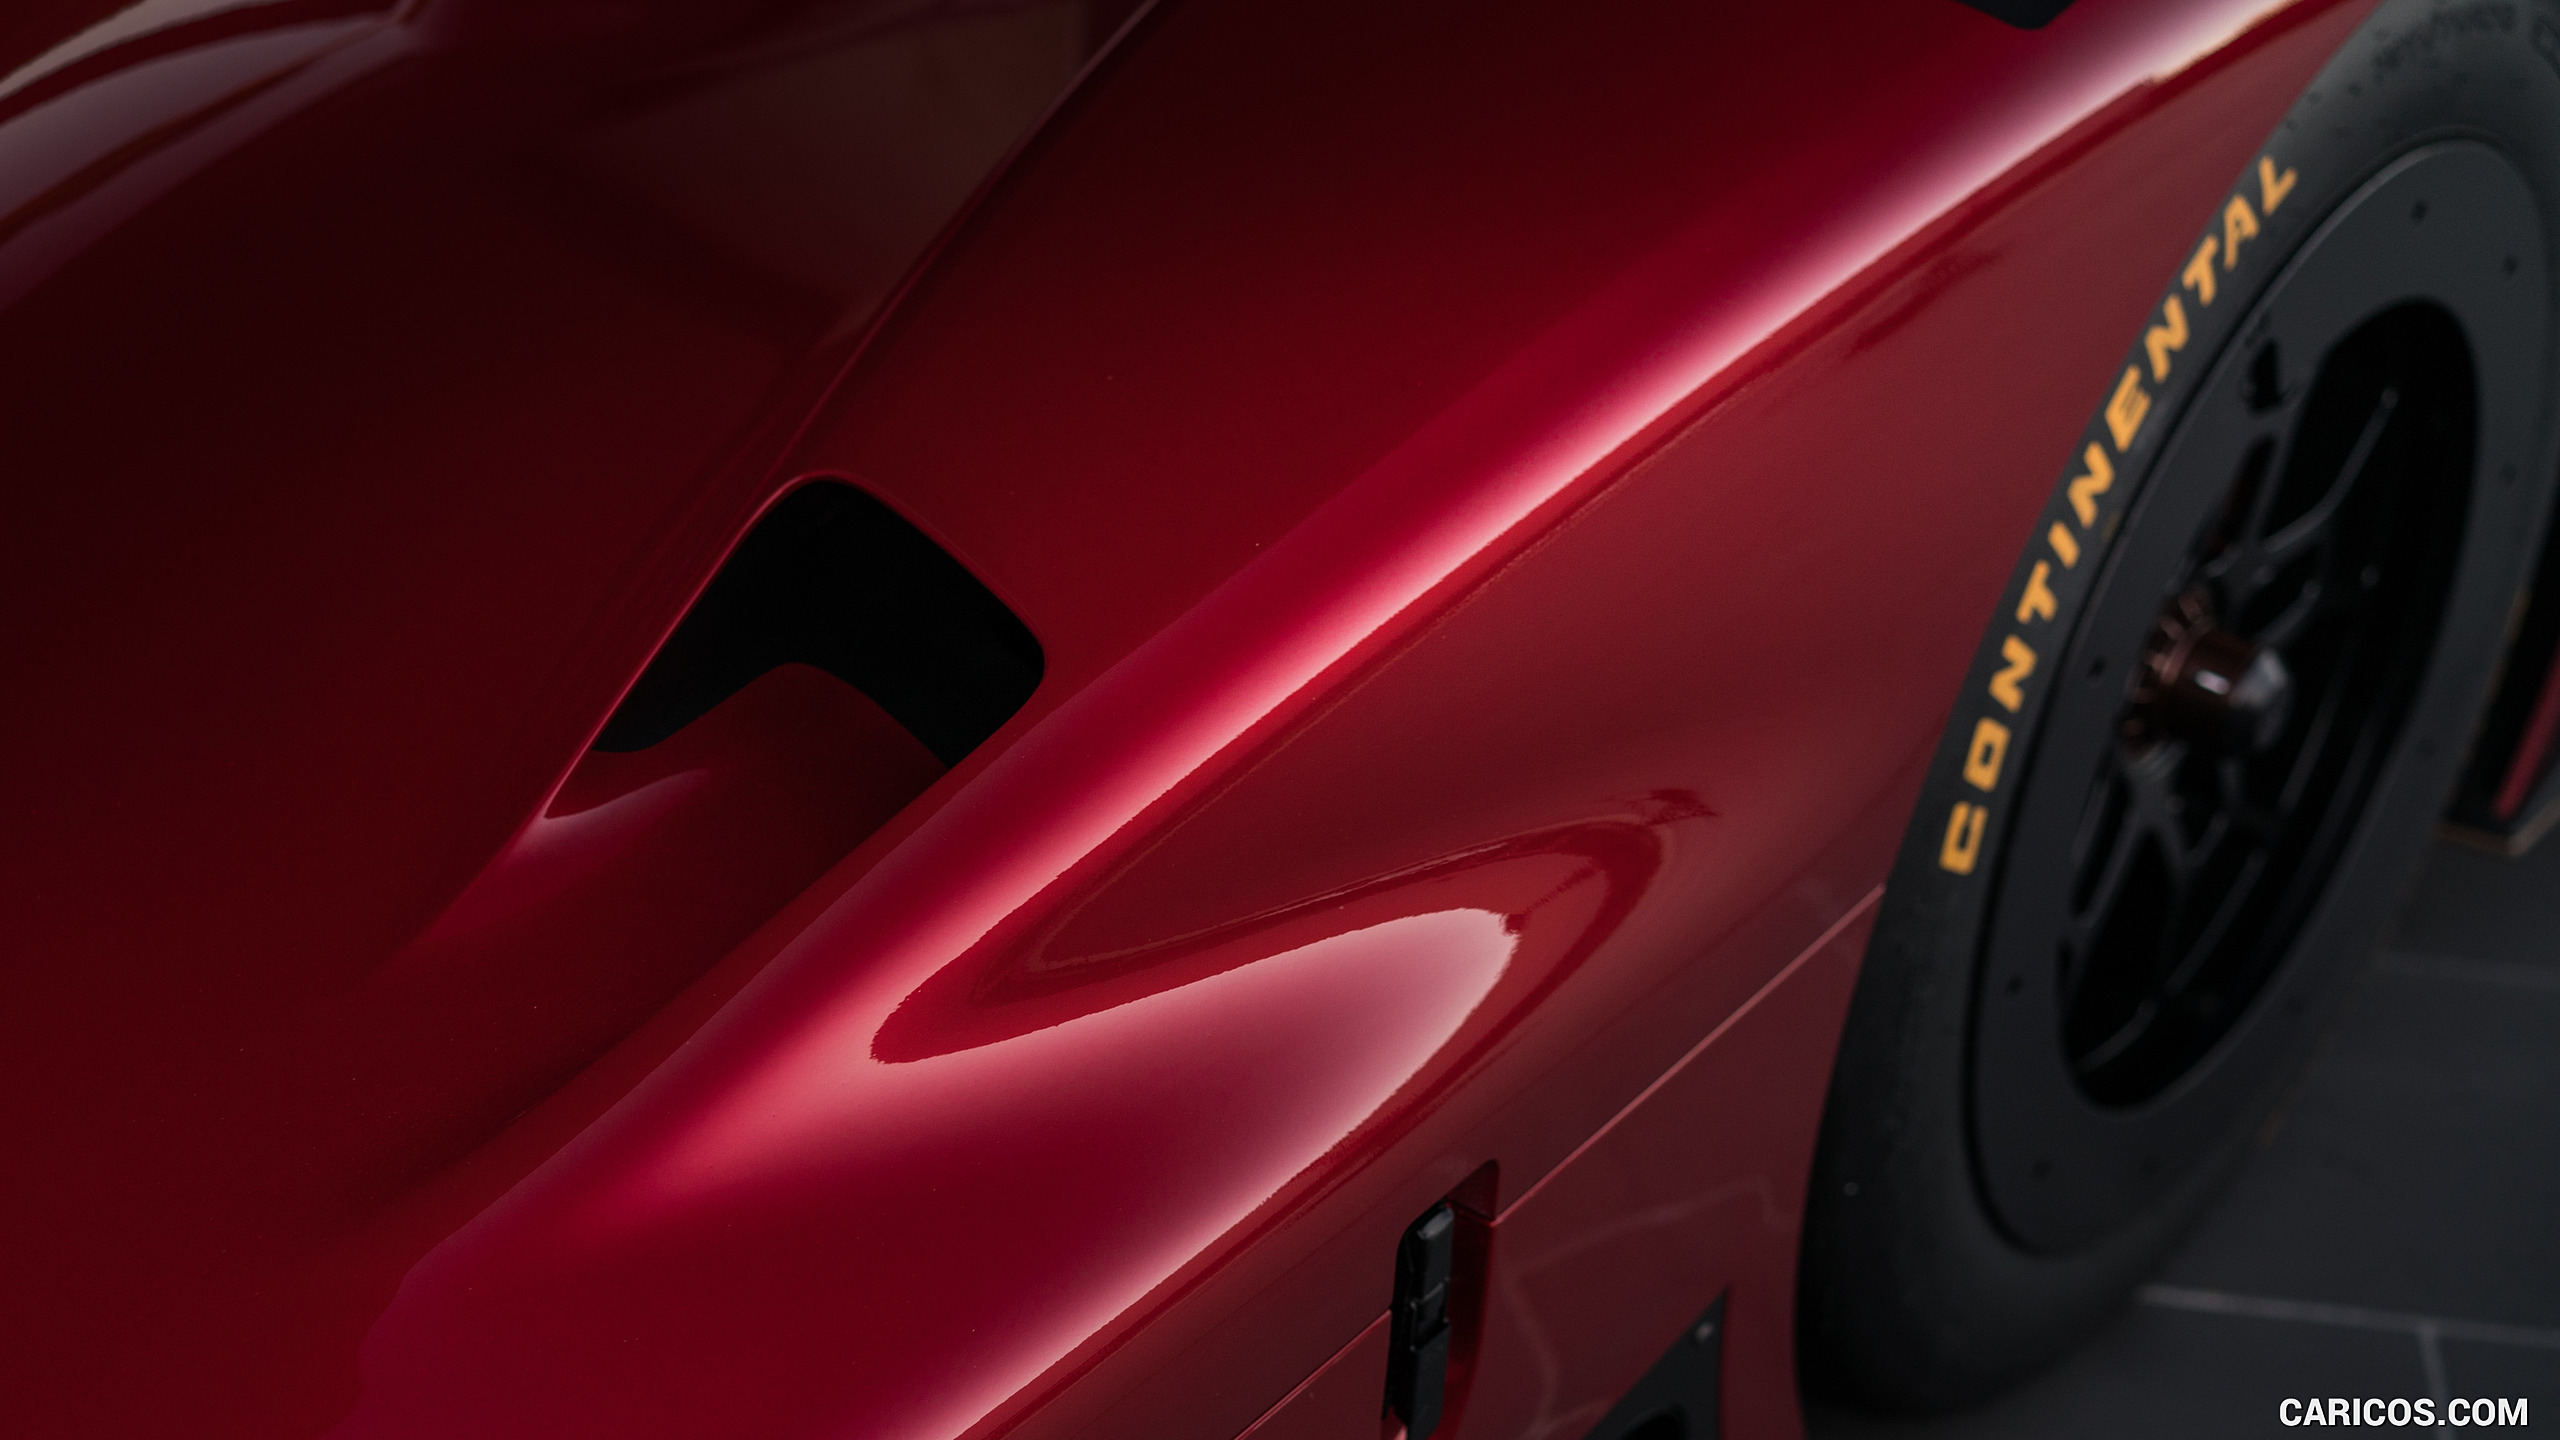 2016 Mazda RT24-P Race Car Concept - Detail, #9 of 9